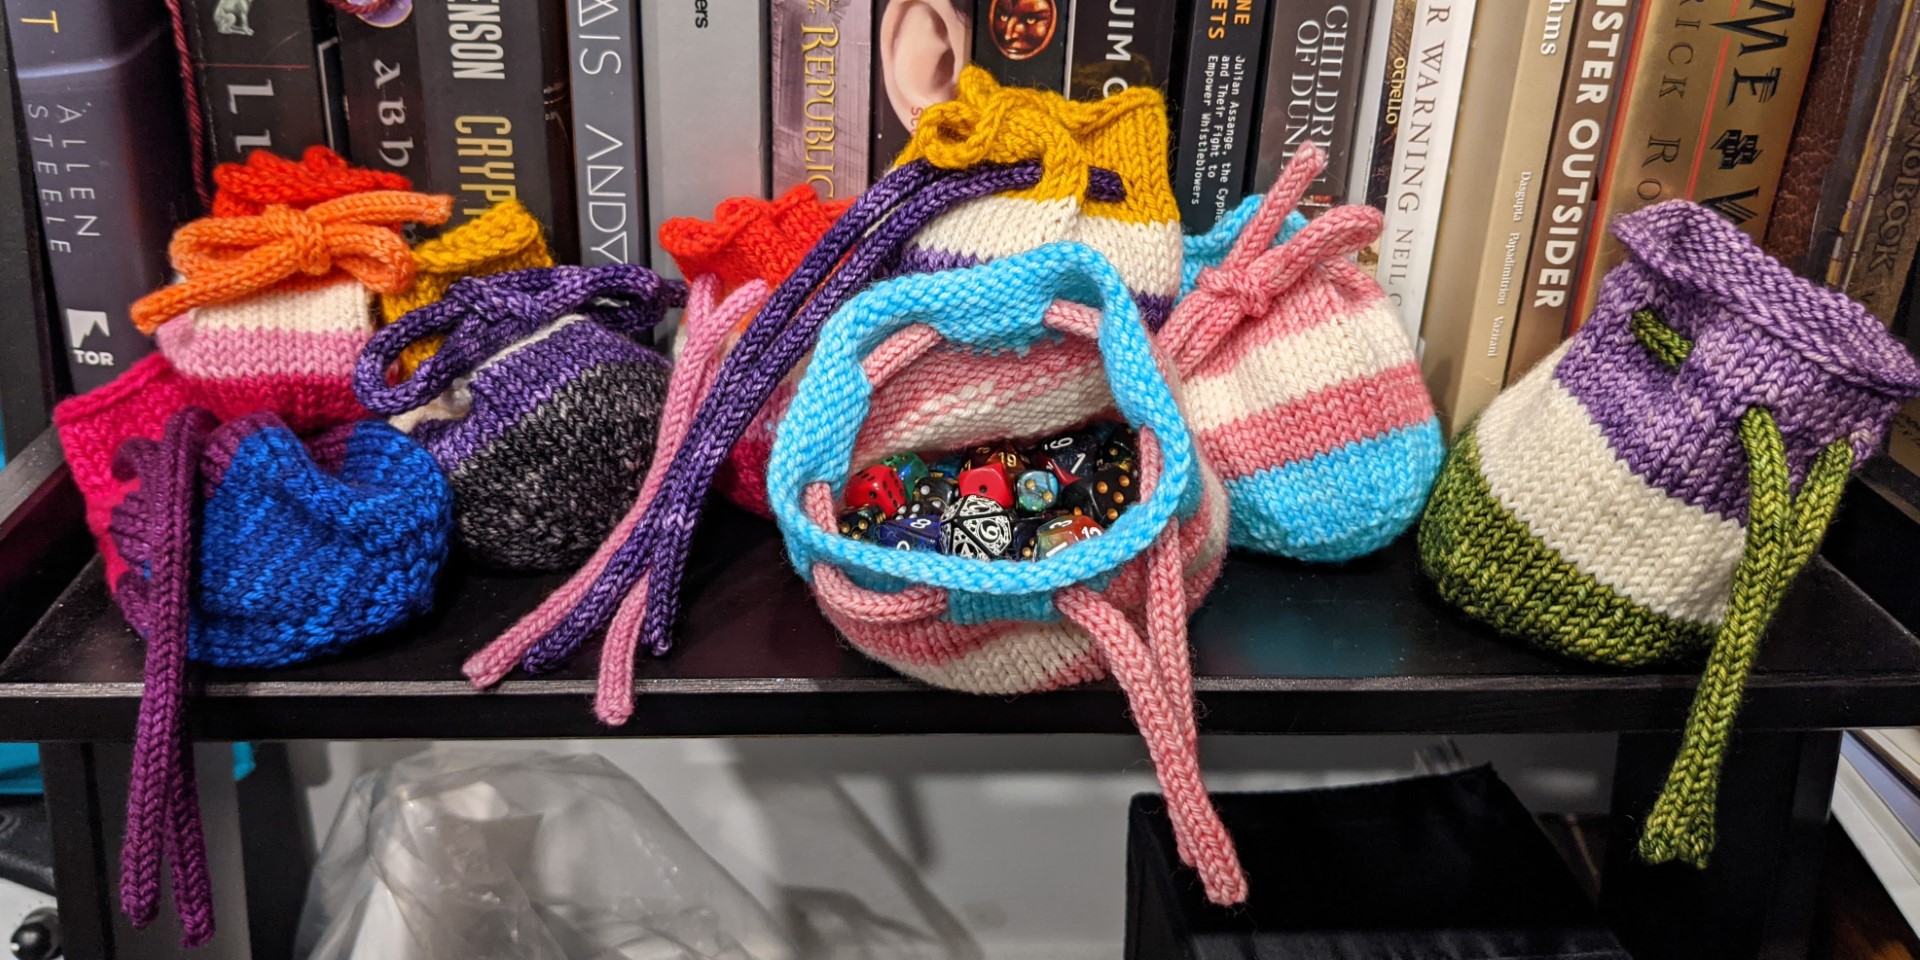 Several knitted drawstring dice bags sit in front of a bookshelf. They are in different pride flag colors; from right to left (skipping a few duplicates) bisexual, lesbian, nonbinary, trans, and genderqueer. The trans-colored dice bag in the center opens towards the camera, showing a variety of colorful dice inside.